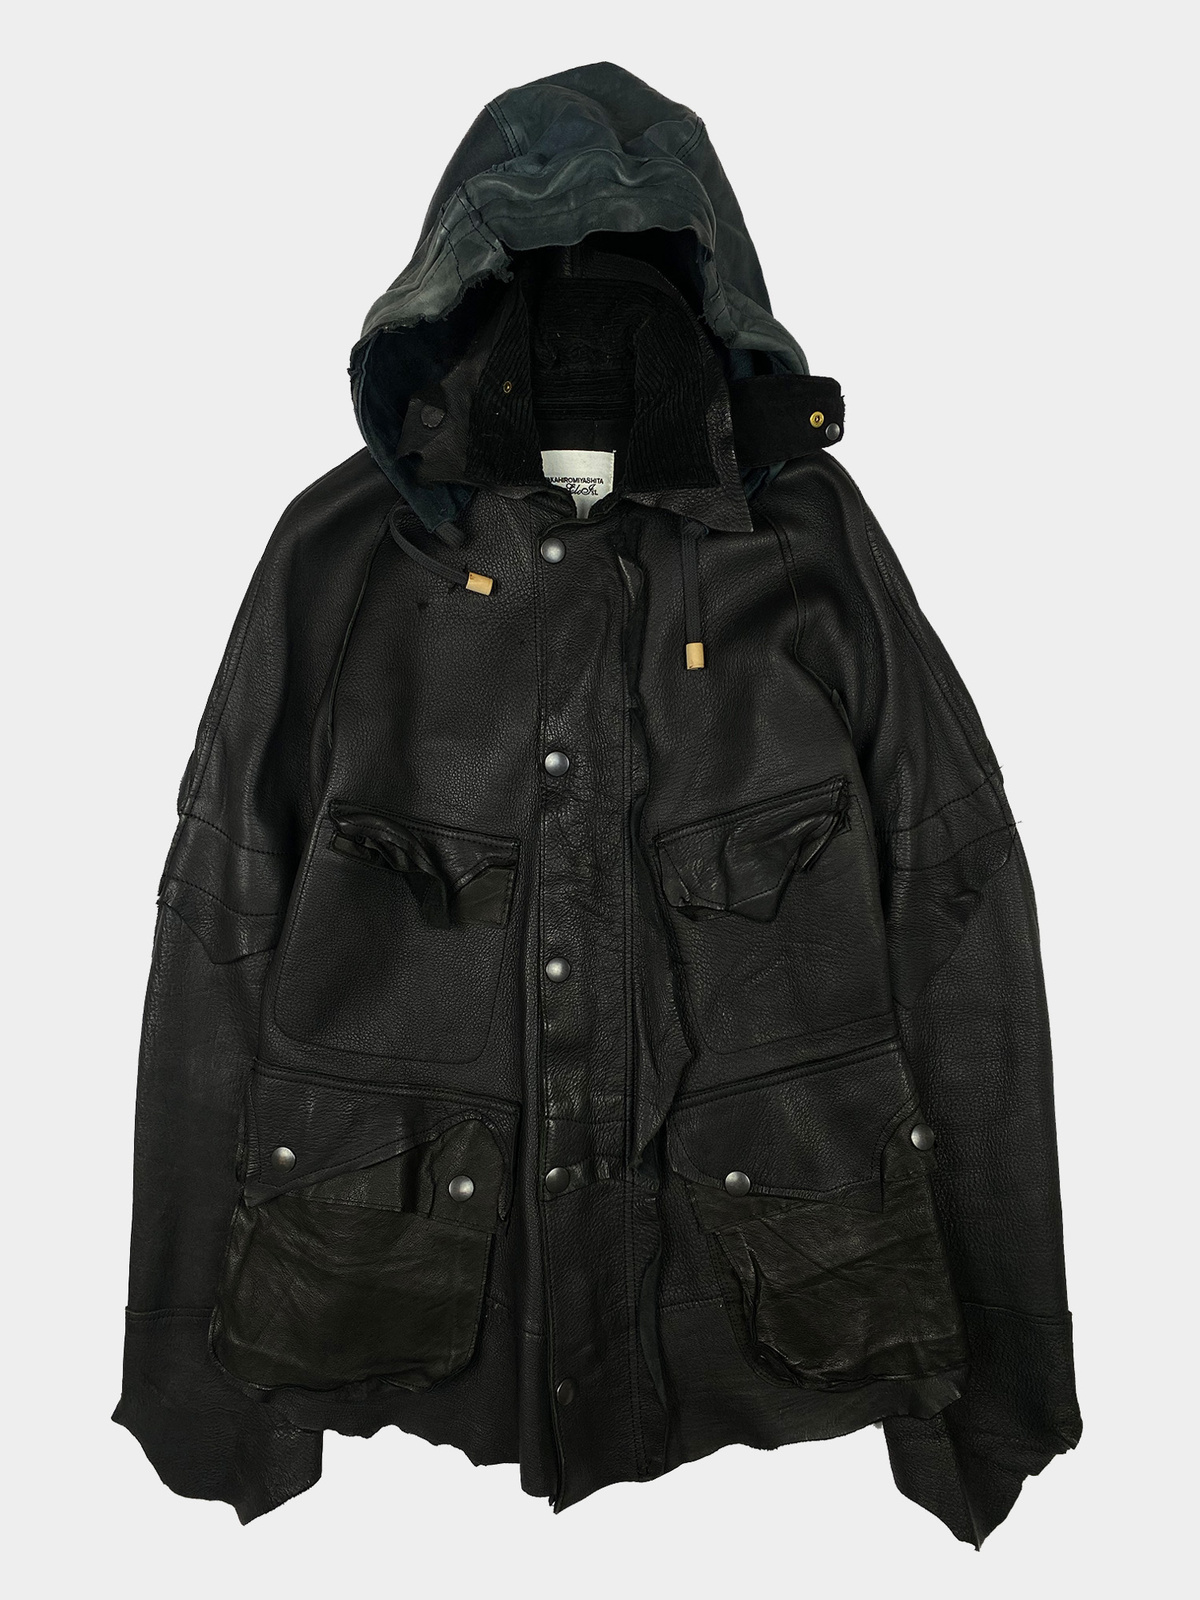 THESOLOIST. AW2013 Leather Rain Jacket — ARCHIVED